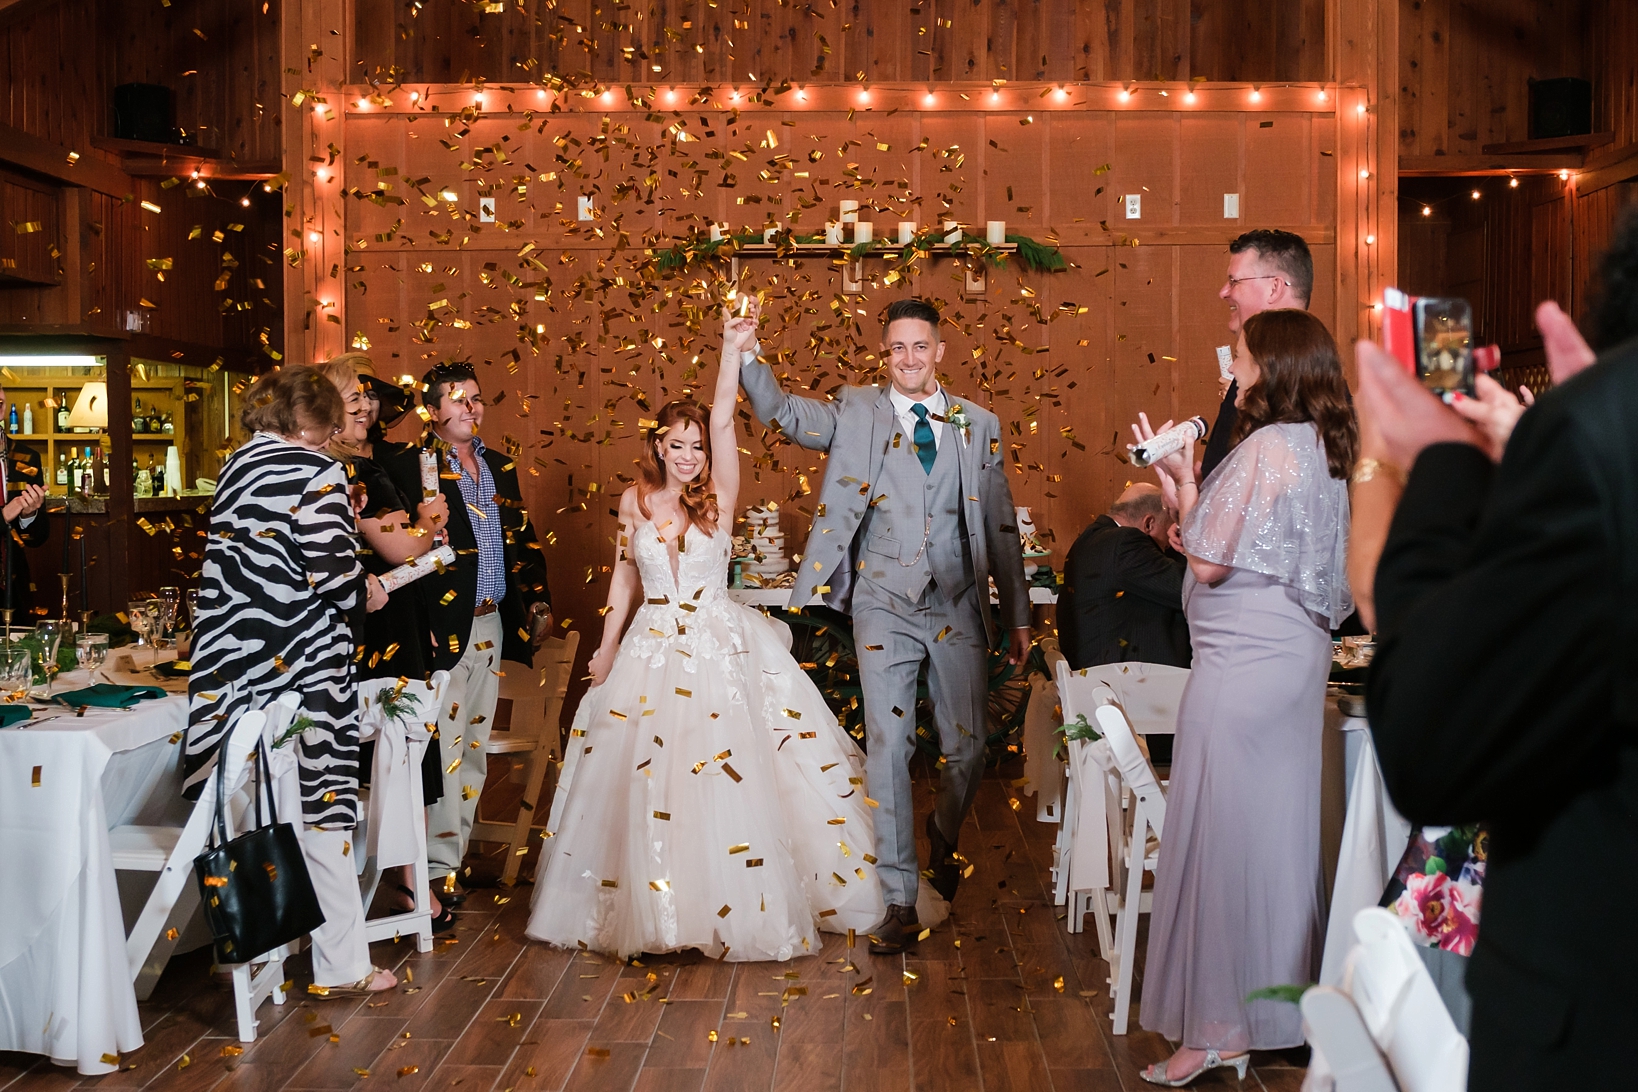 Bride and Groom enter under a canopy of glitter thrown by their guests